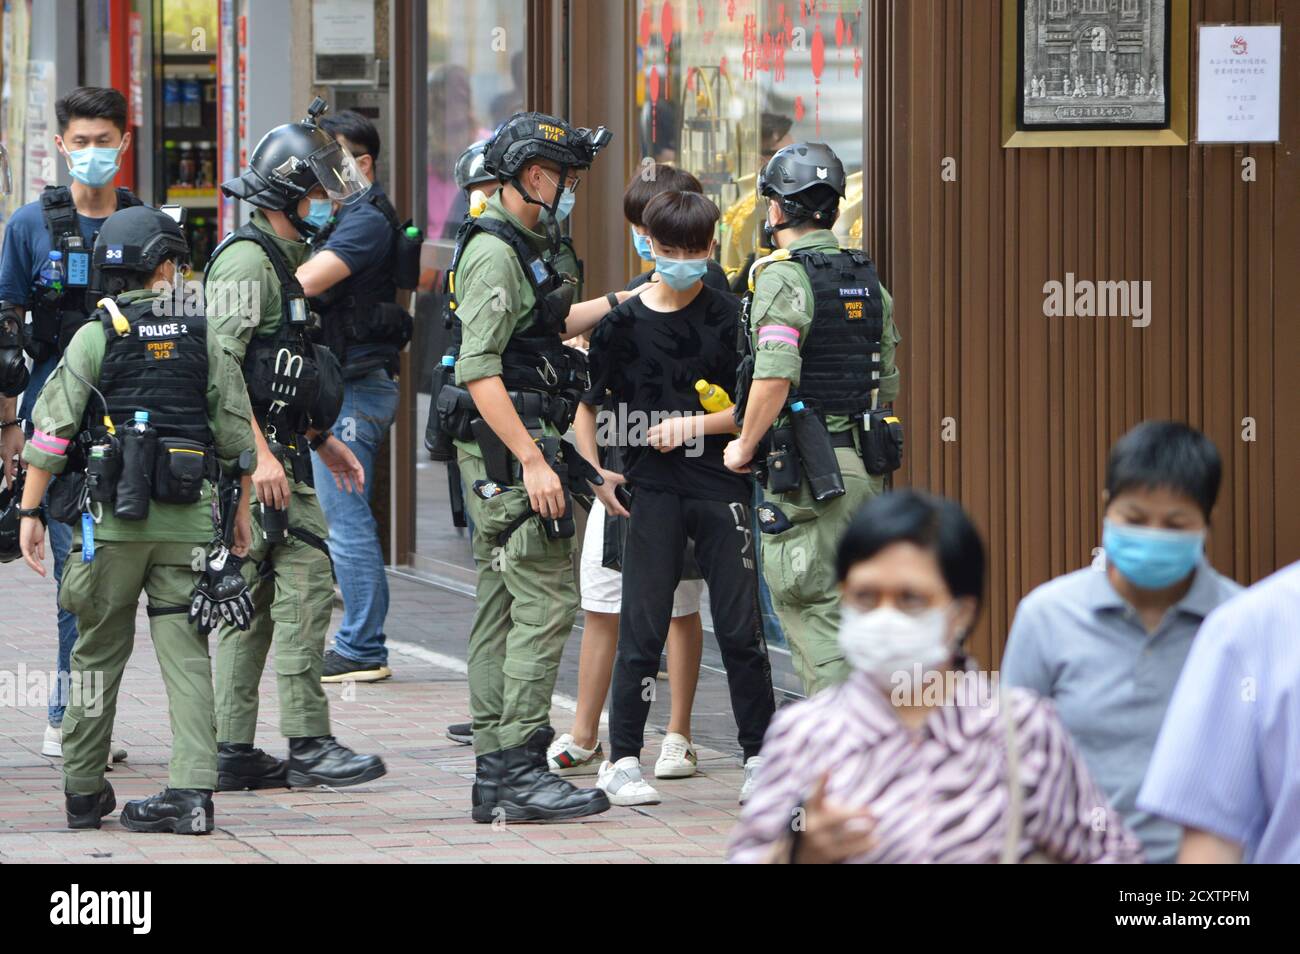 Hong Kong police stop and search a young person in the Causeway Bay shopping district on National Day, 1 October 2020 Stock Photo